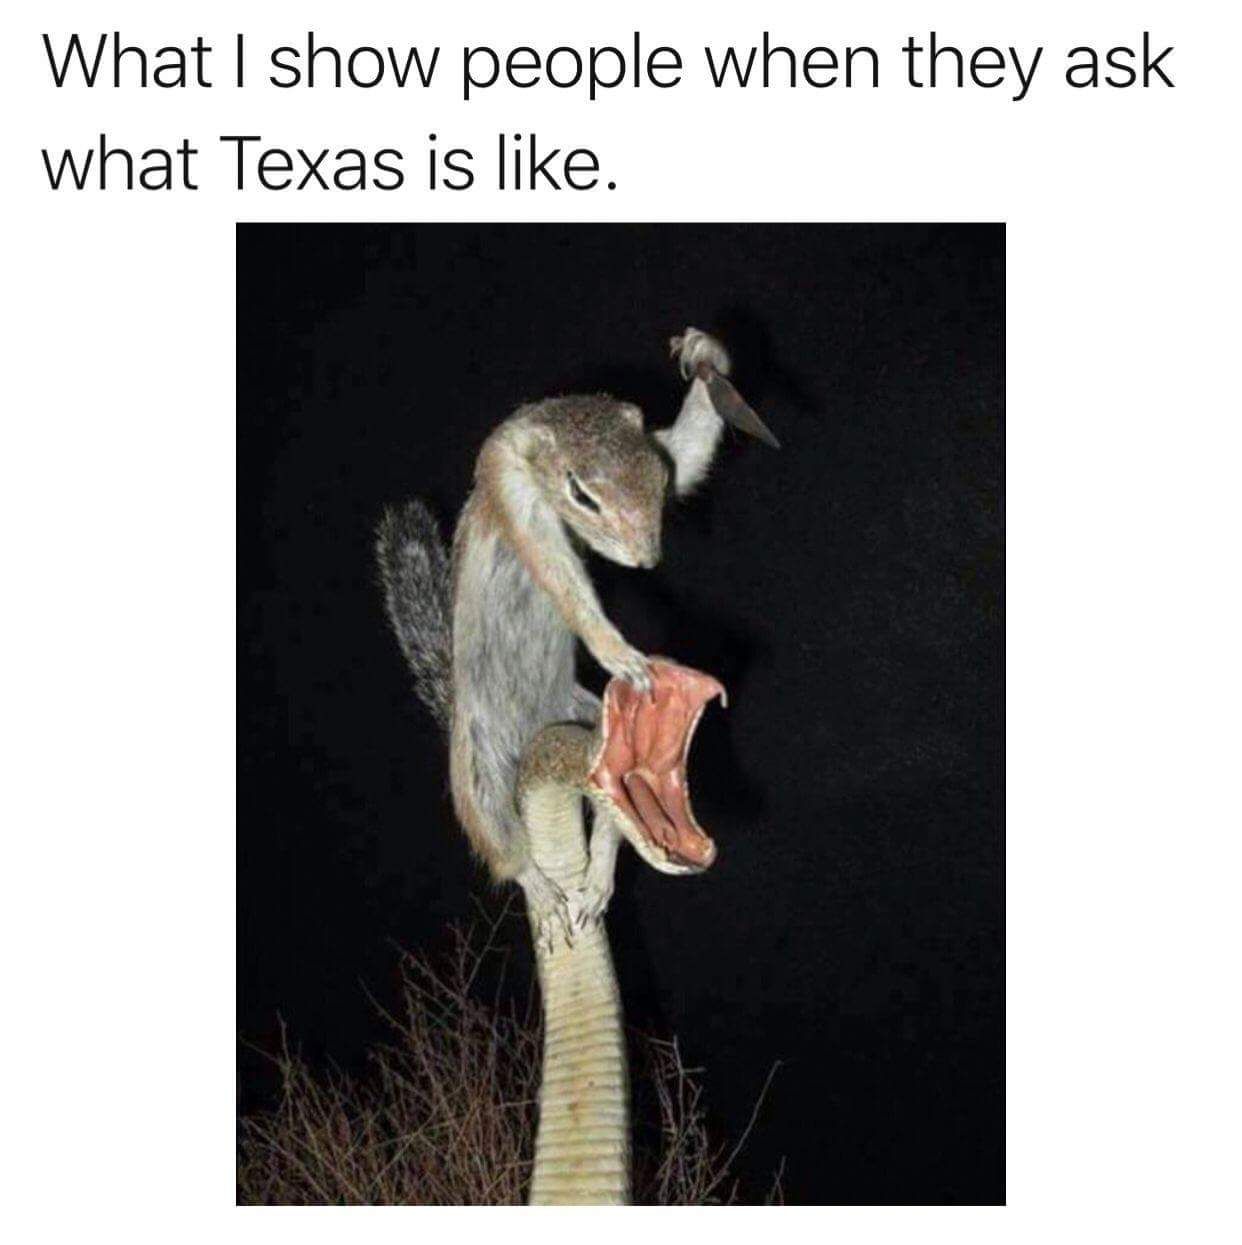 yeee hawww - What I show people when they ask what Texas is .